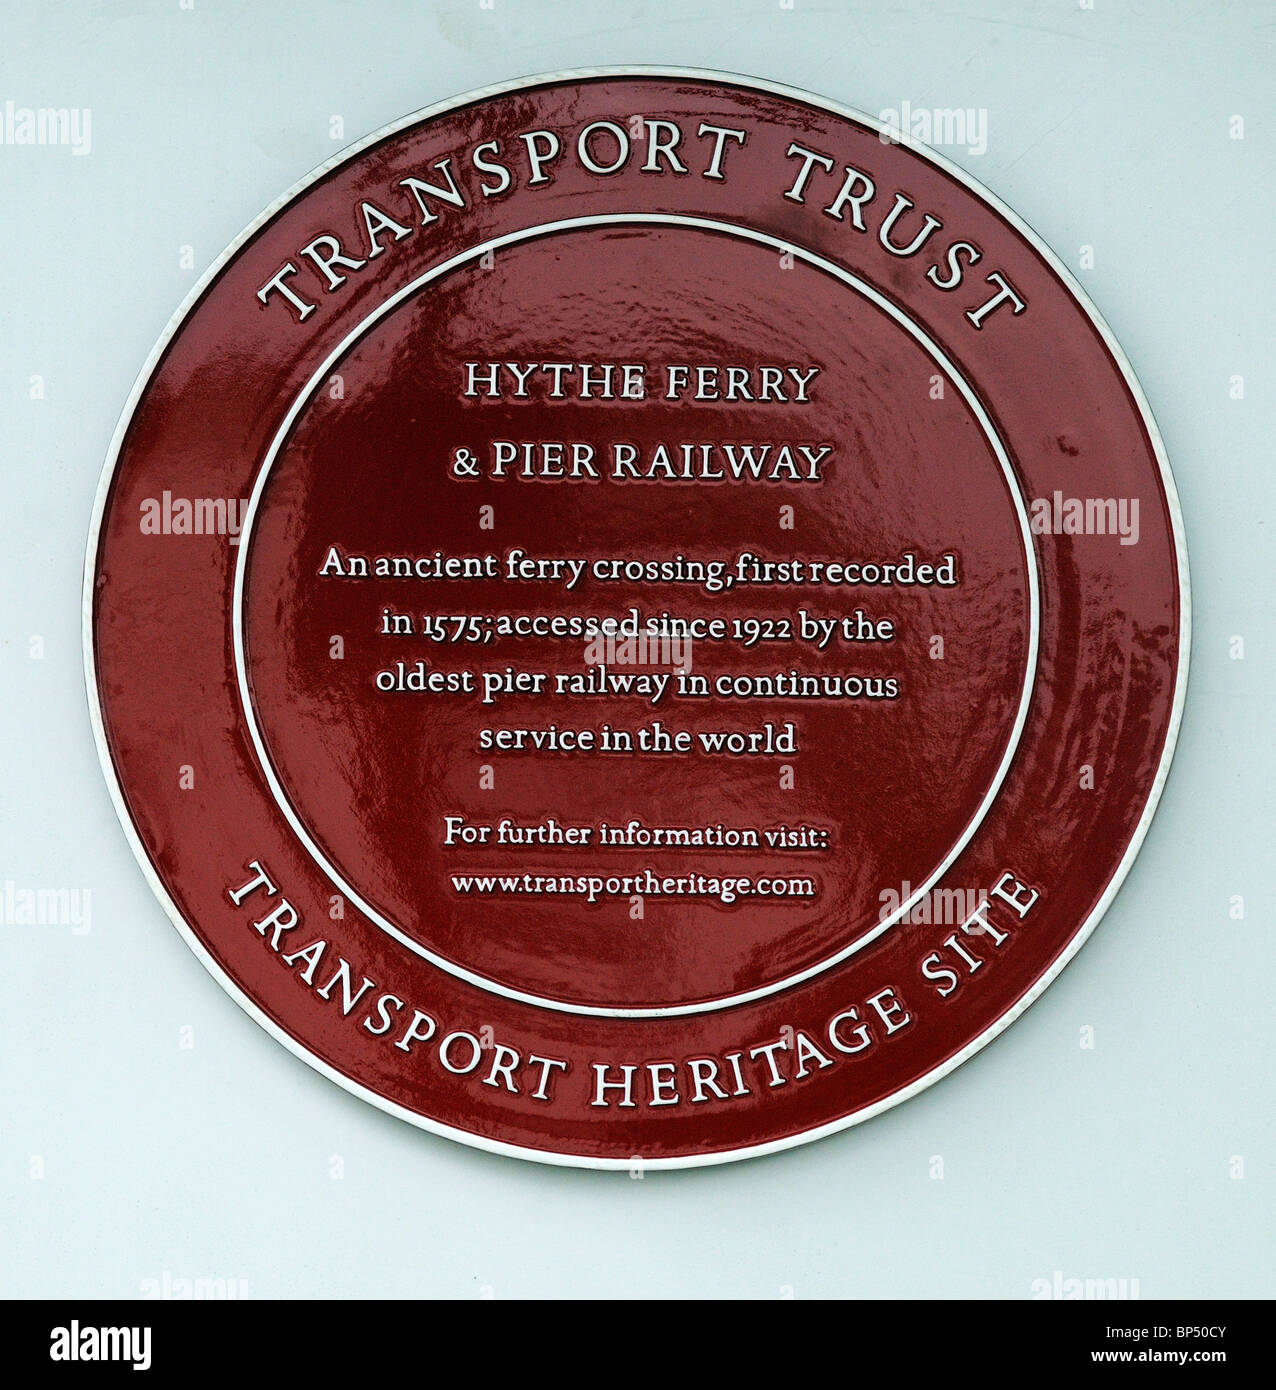 Transport Heritage sign at Hythe Ferry & Pier Railway Hampshire England UK Stock Photo